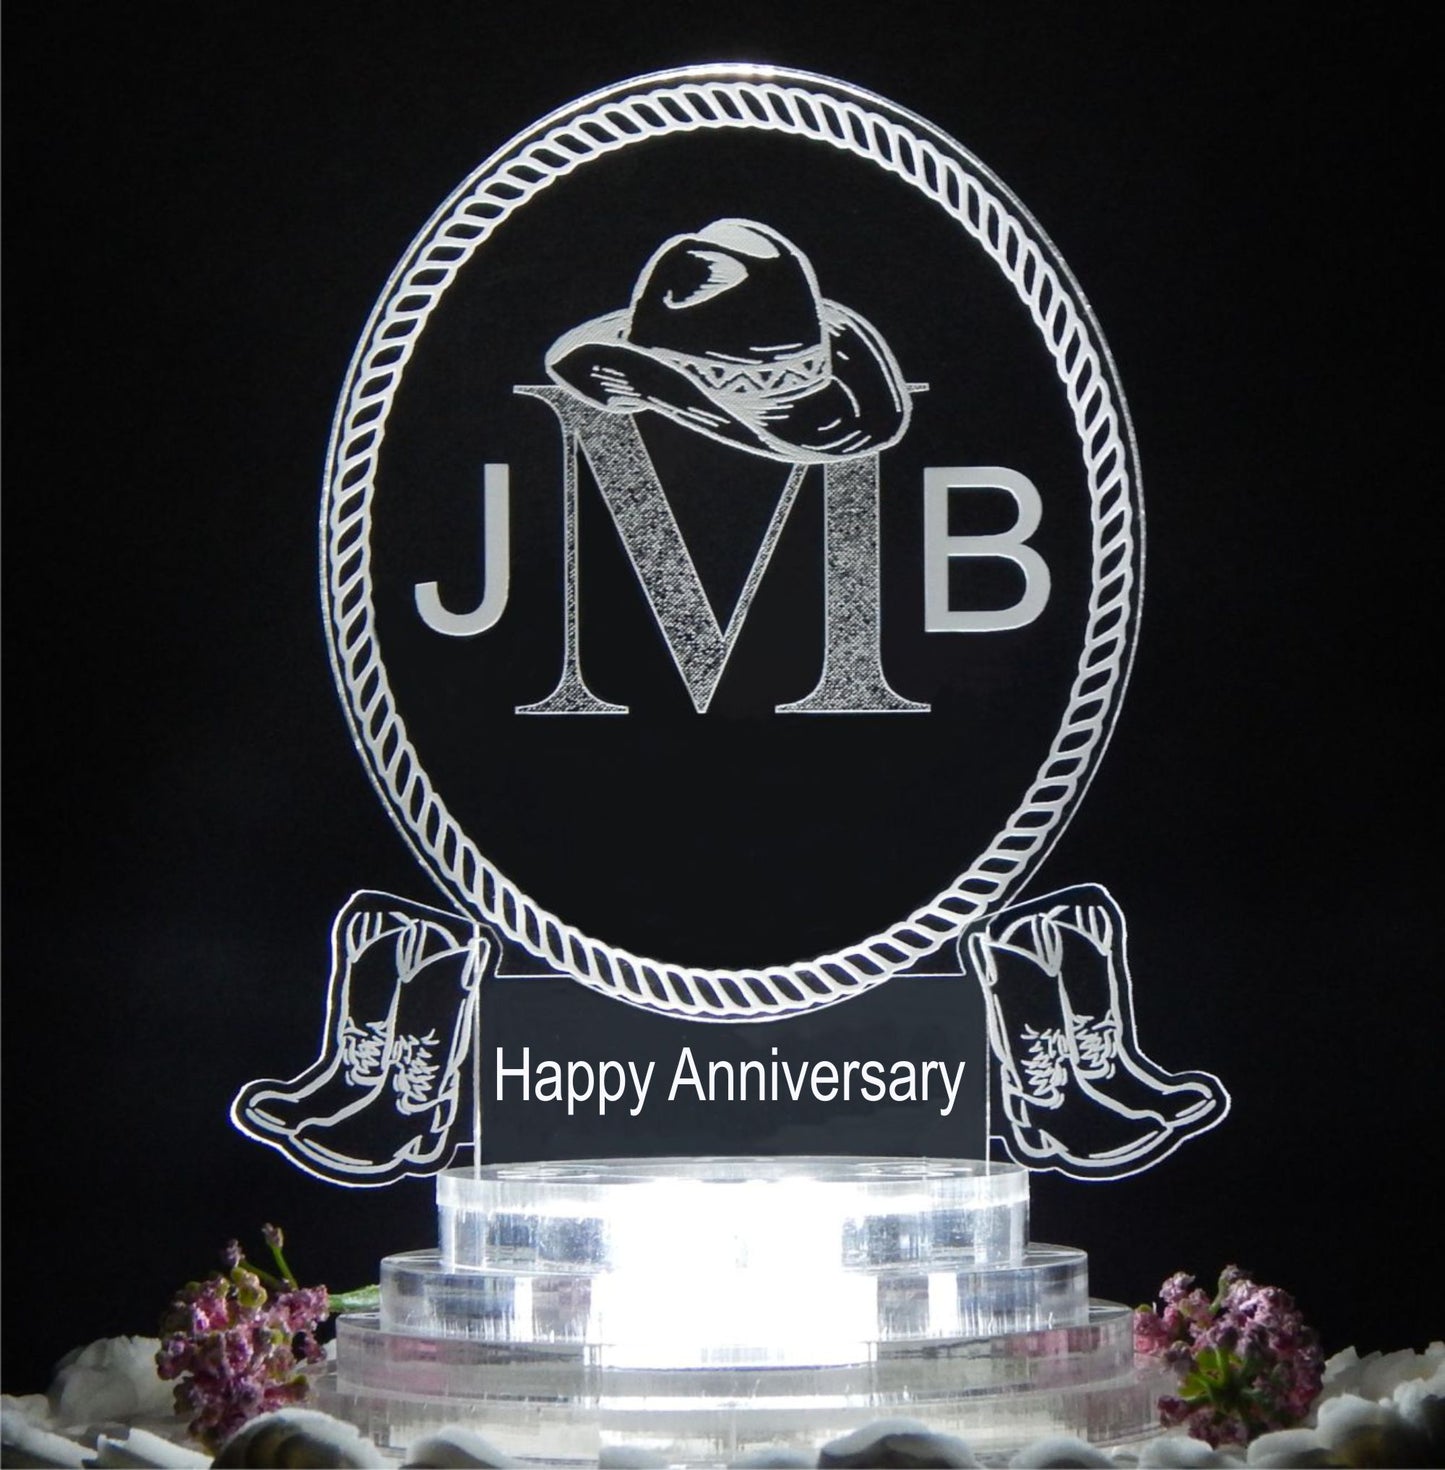 clear acrylic oval cake topper designed in a western cowboy theme engraved with a 3 letter monogram and Happy Anniversary